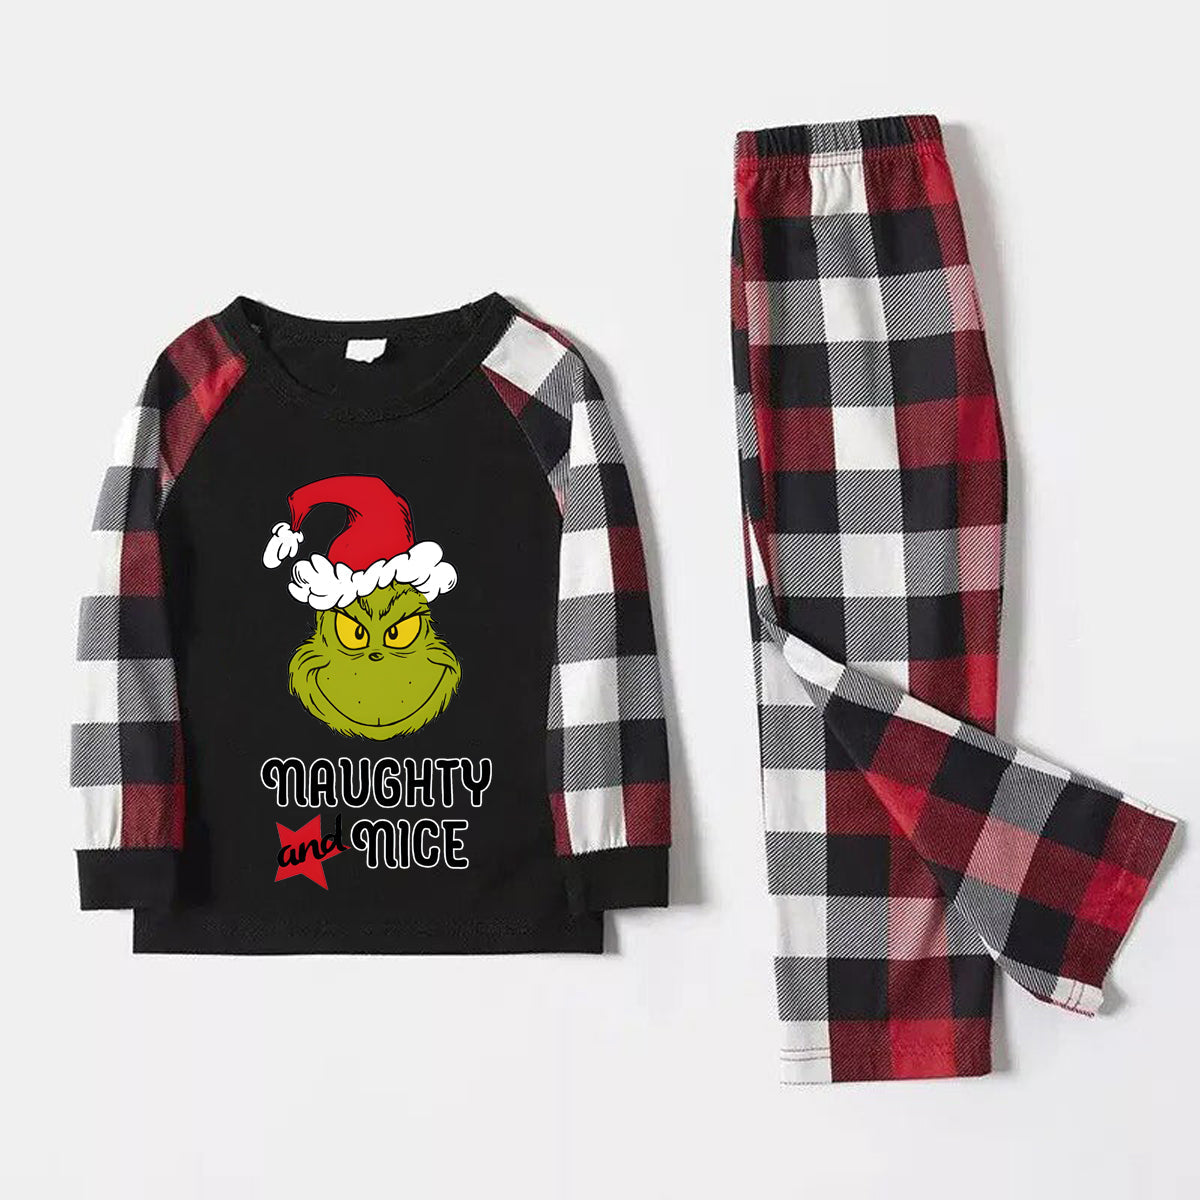 Christmas "Naughty&Nice" Letter Print Patterned Casual Long Sleeve Sweatshirts Contrast Tops and Red & Black & White Plaid Pants Family Matching Pajamas Set With Pet Bandana